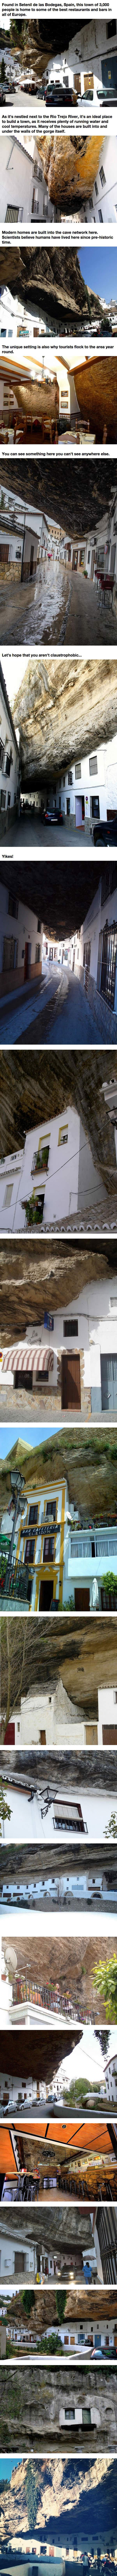 found in setenil de las bodegas, spain, many of the houses are built into and under the walls of the gorge itself